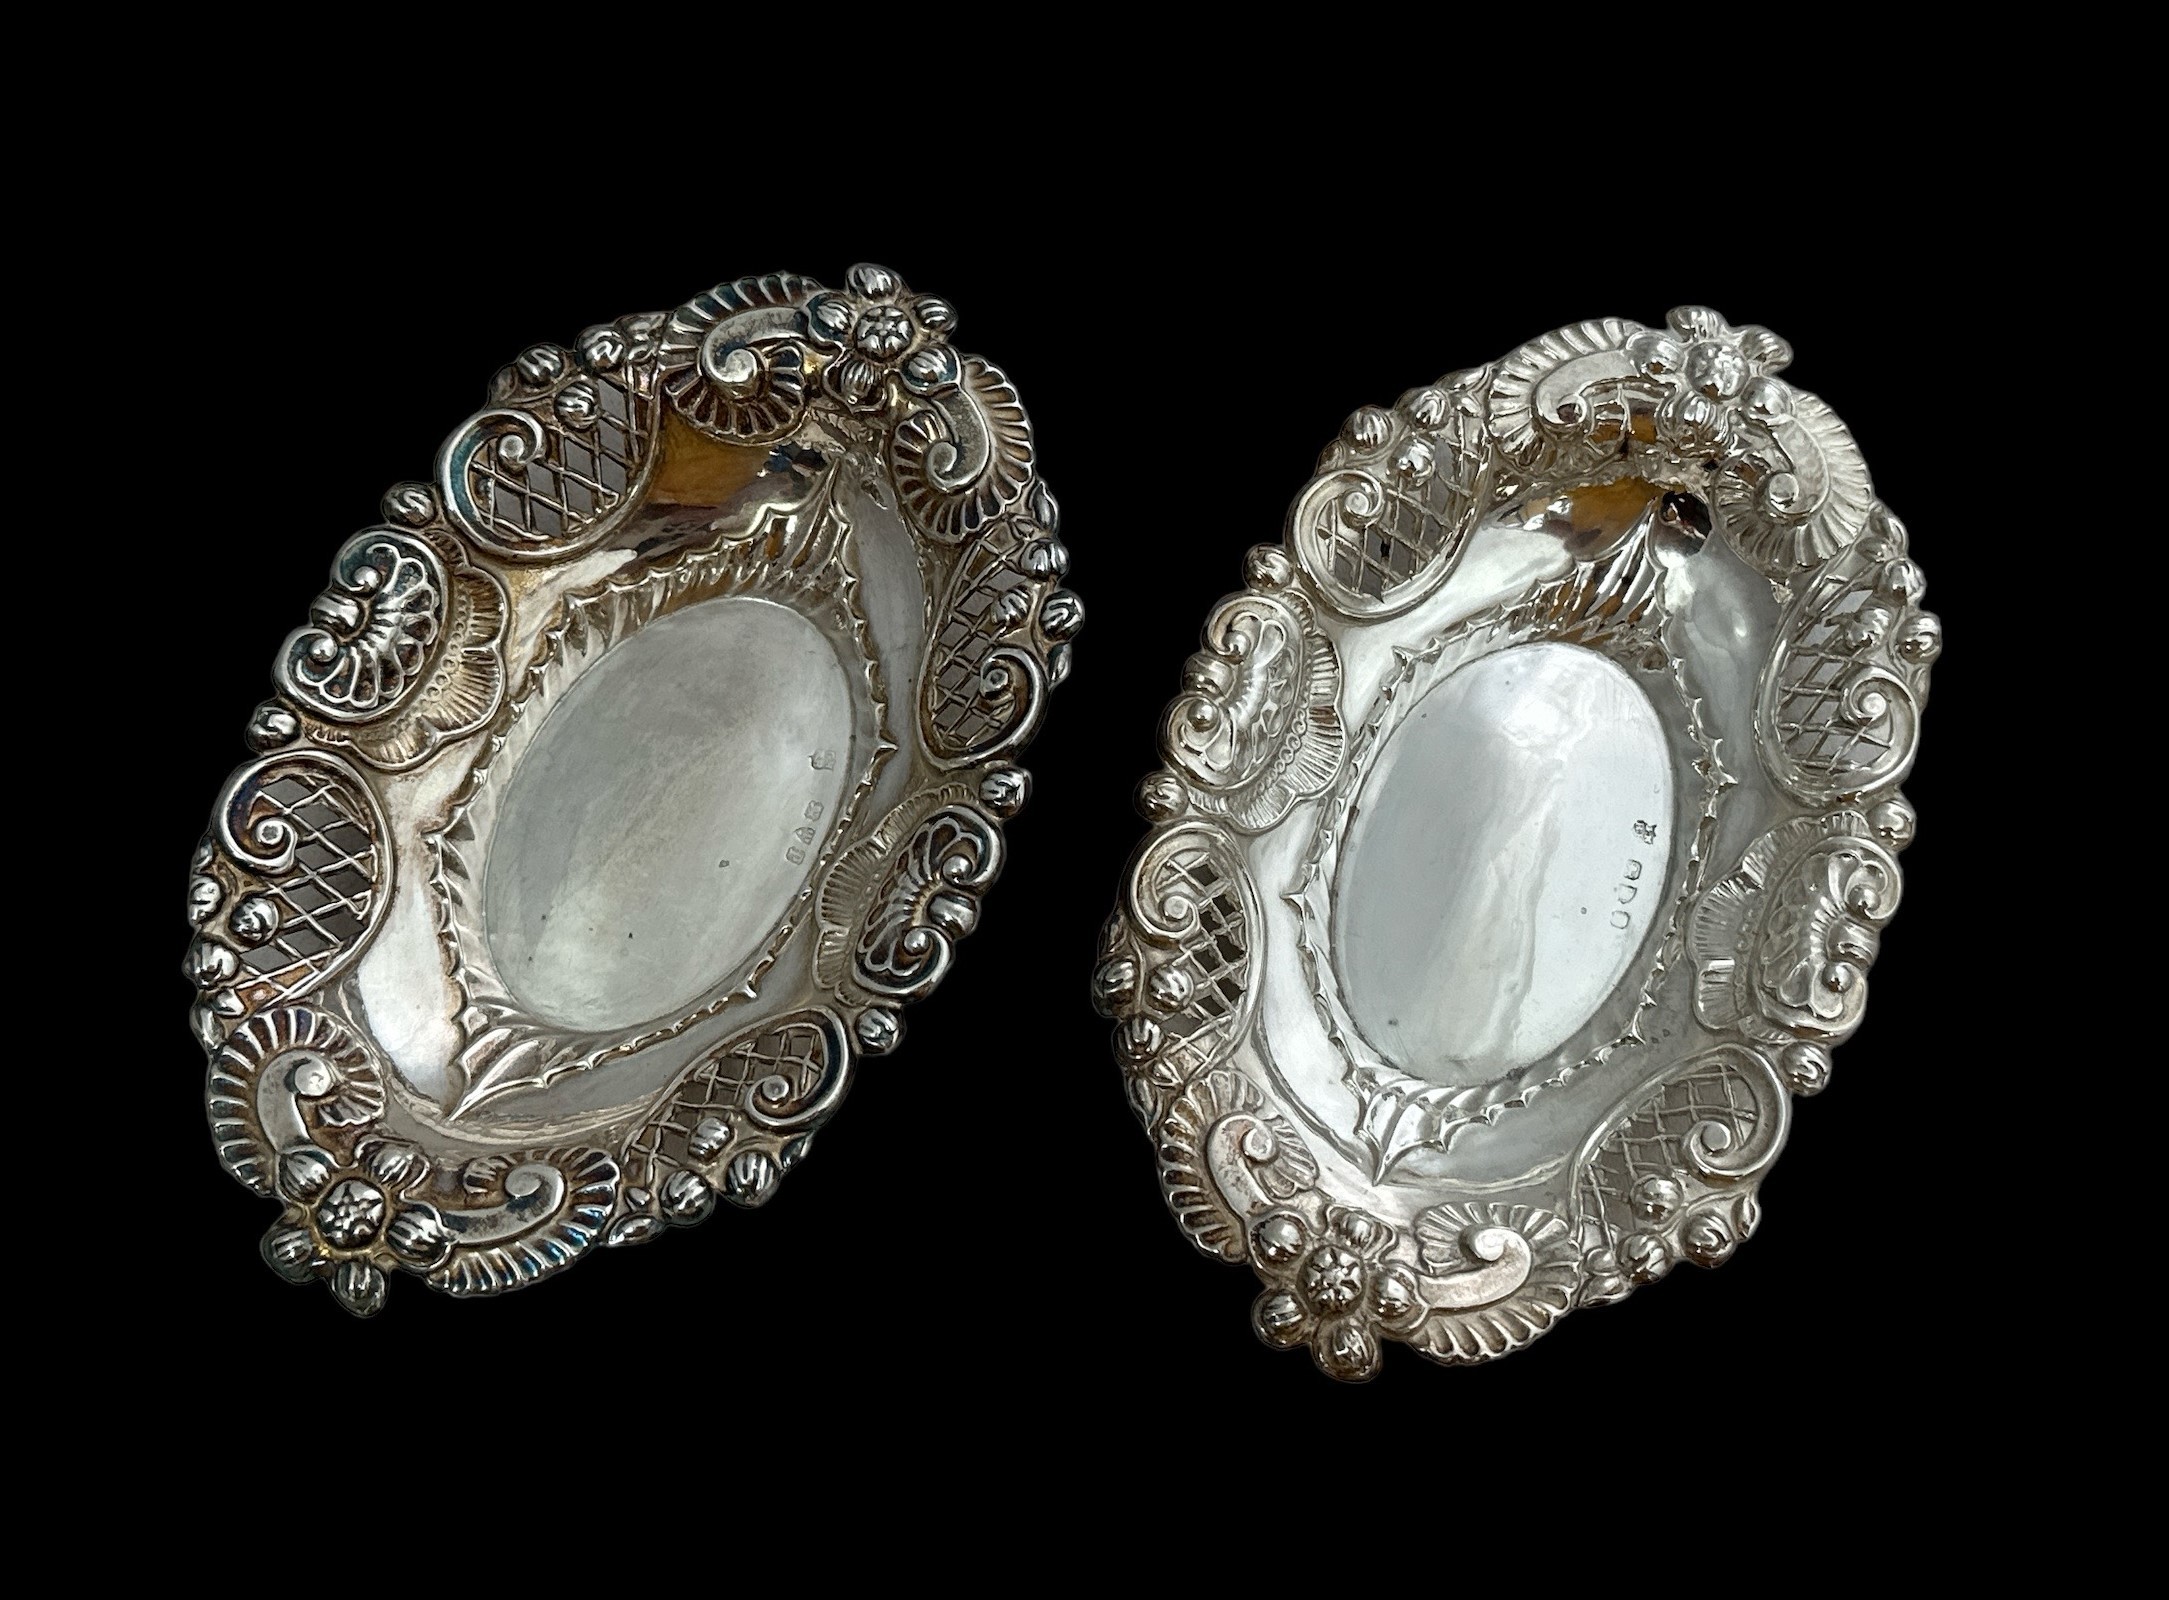 Two bon bon dishes with a filigree design, by Nathan and Hayes, 1898 Chester hallmarks. Weight 67g. - Image 2 of 4